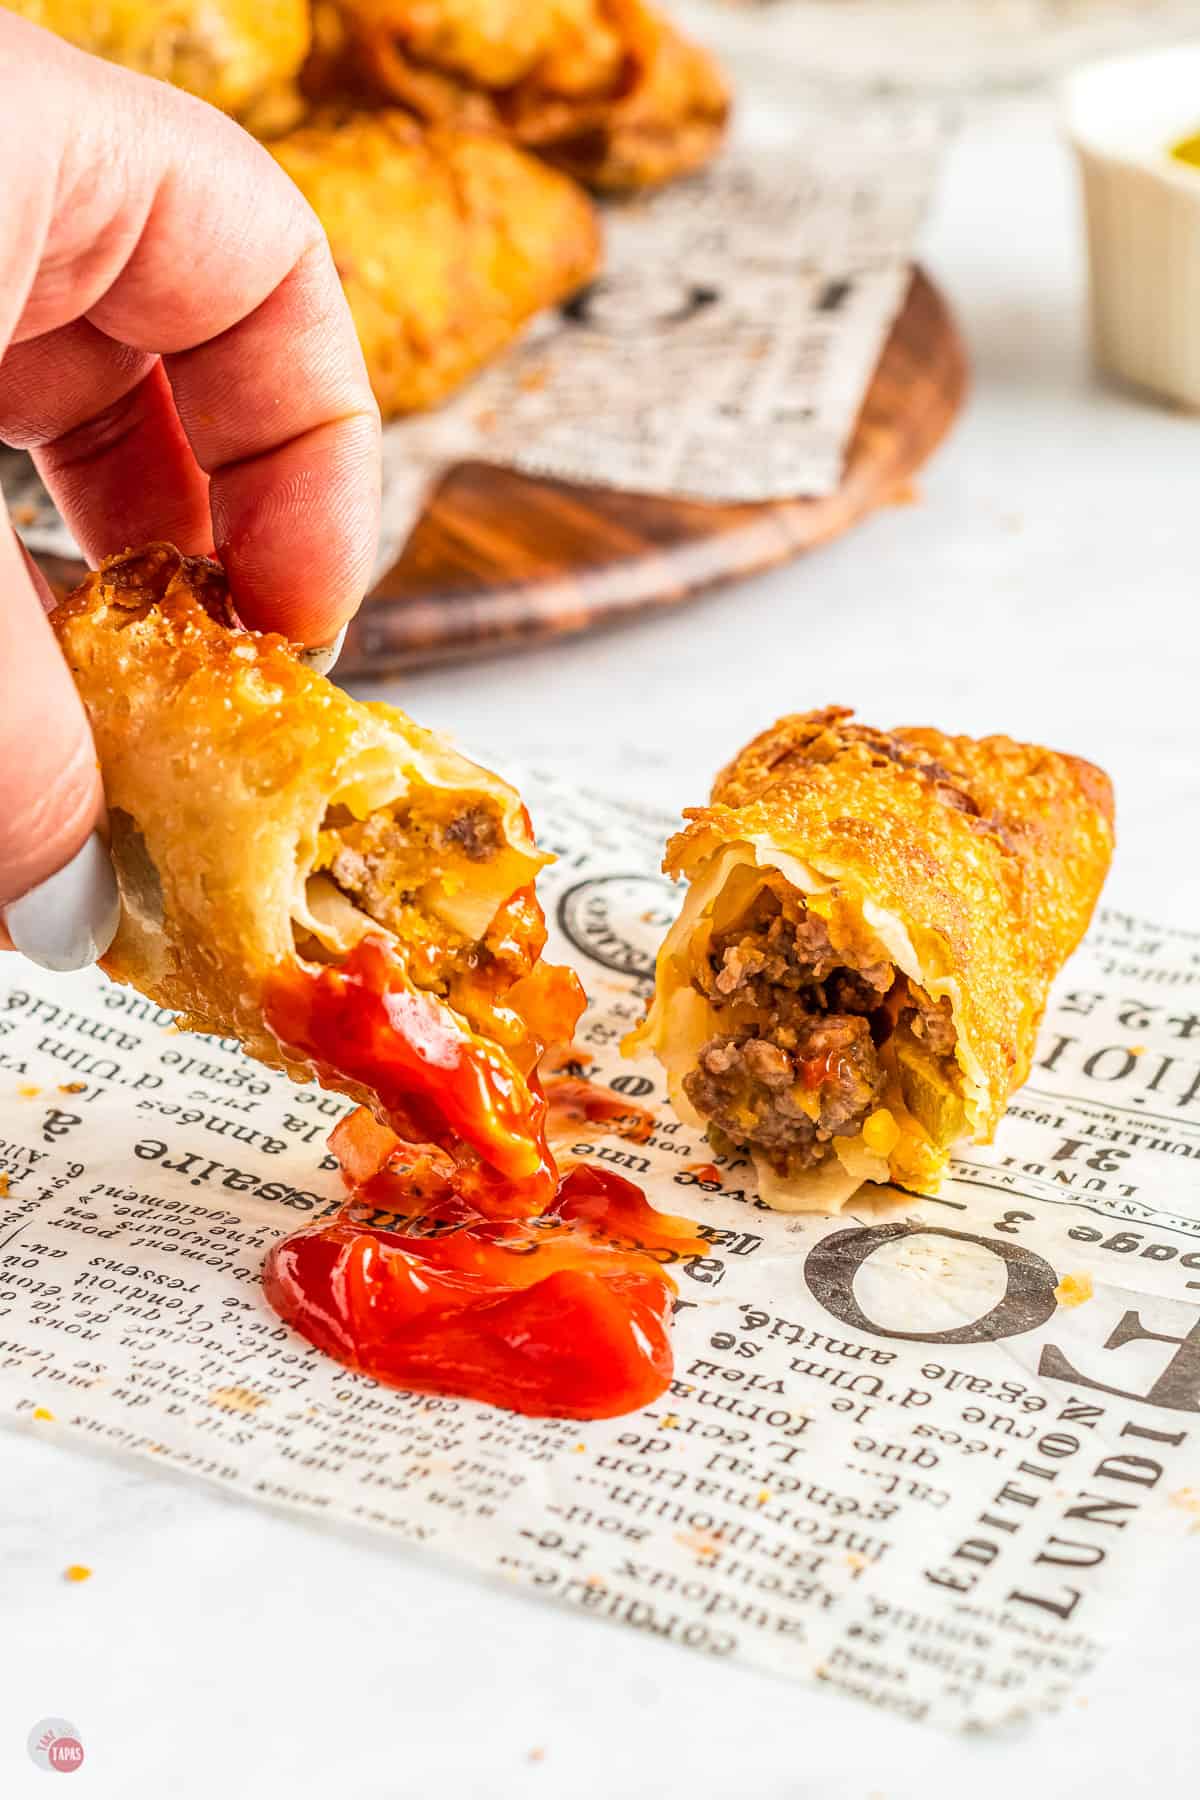 A crispy egg roll cut in half, with minced beef and cheese filling, on top of newspaper with one half being picked up and dipped into ketchup.
